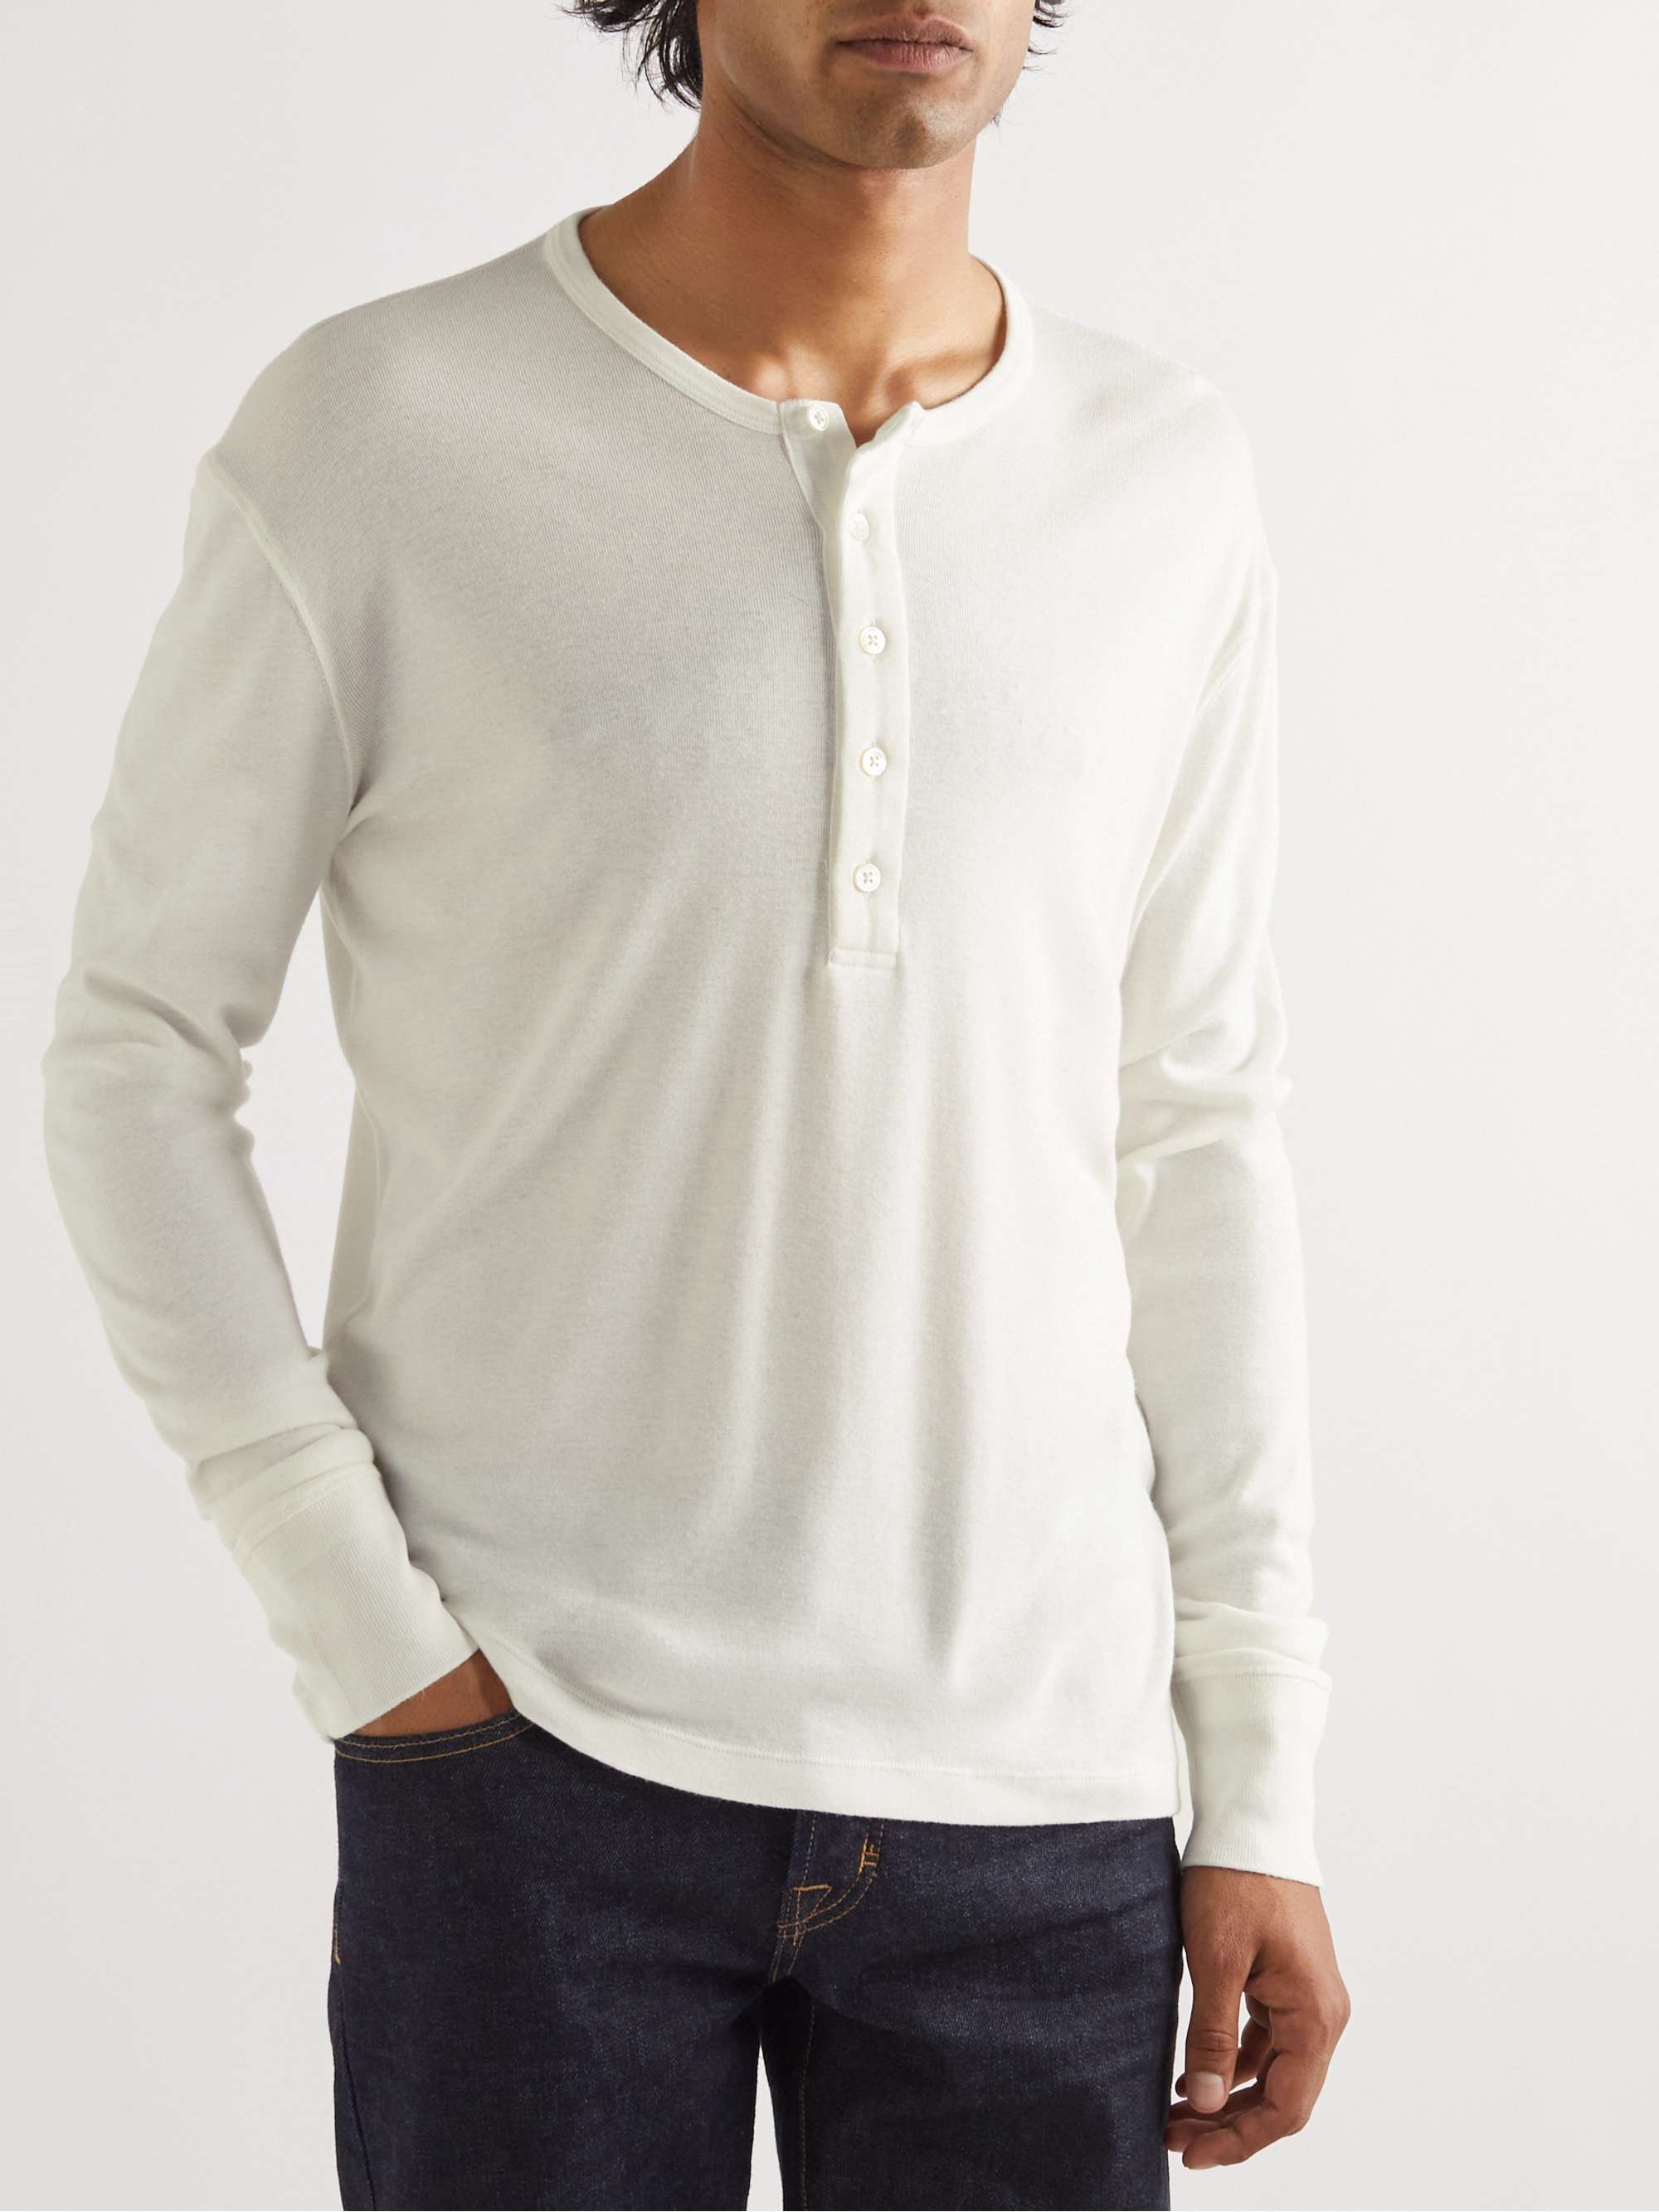 TOM FORD Cotton-Jersey Henley T-Shirt